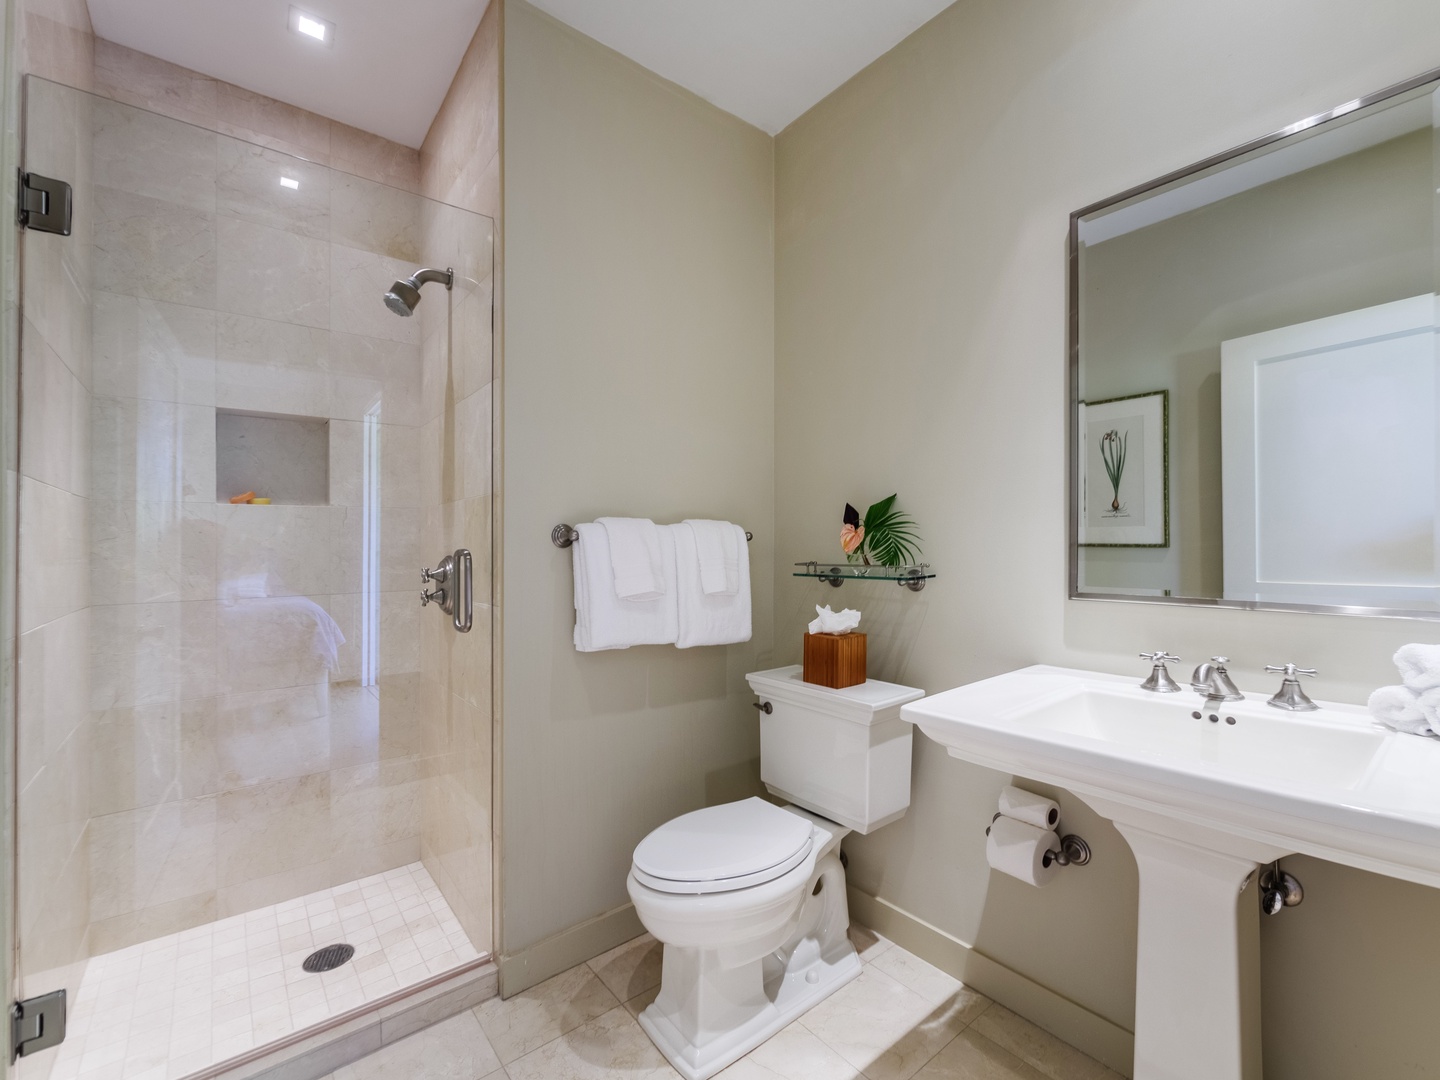 Honolulu Vacation Rentals, Paradise Beach Estate - Ensuite bathroom with a walk-in shower